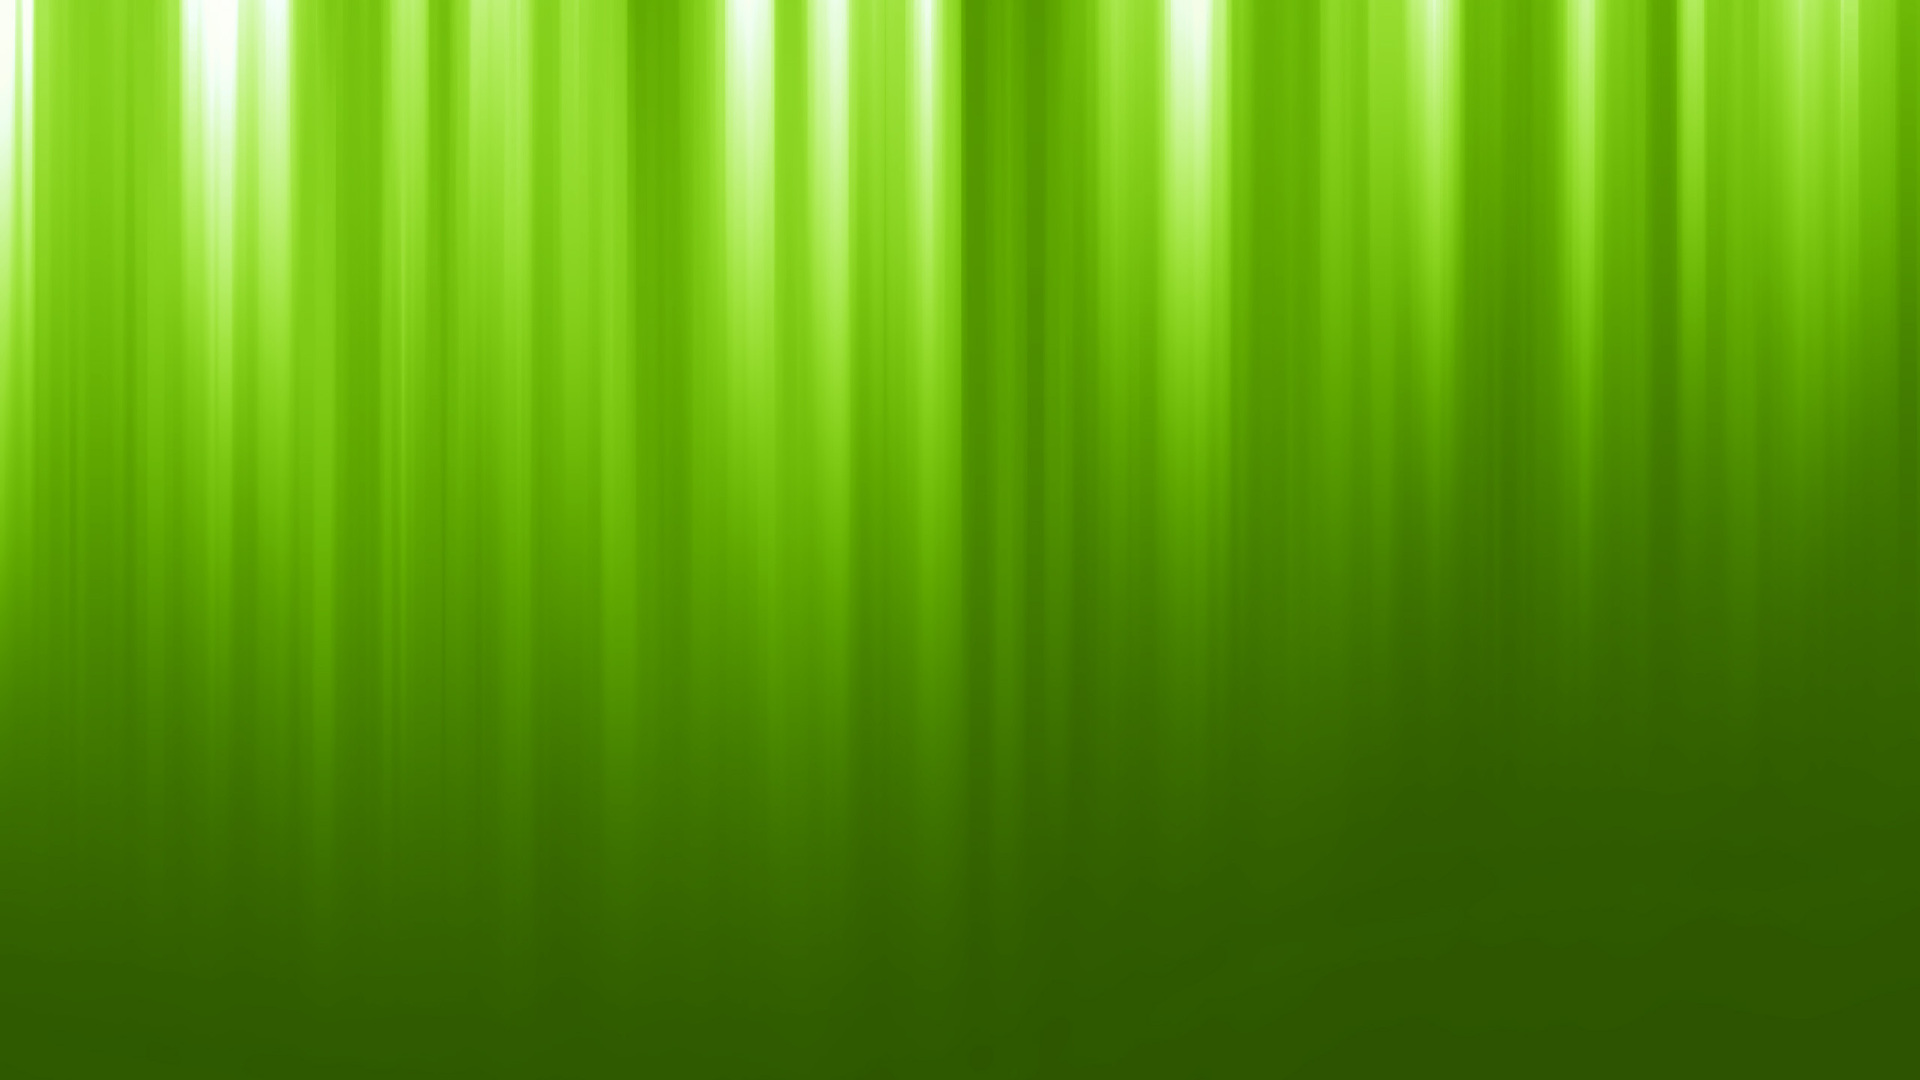 HD Green Wallpaper For Windows And Mac Systems